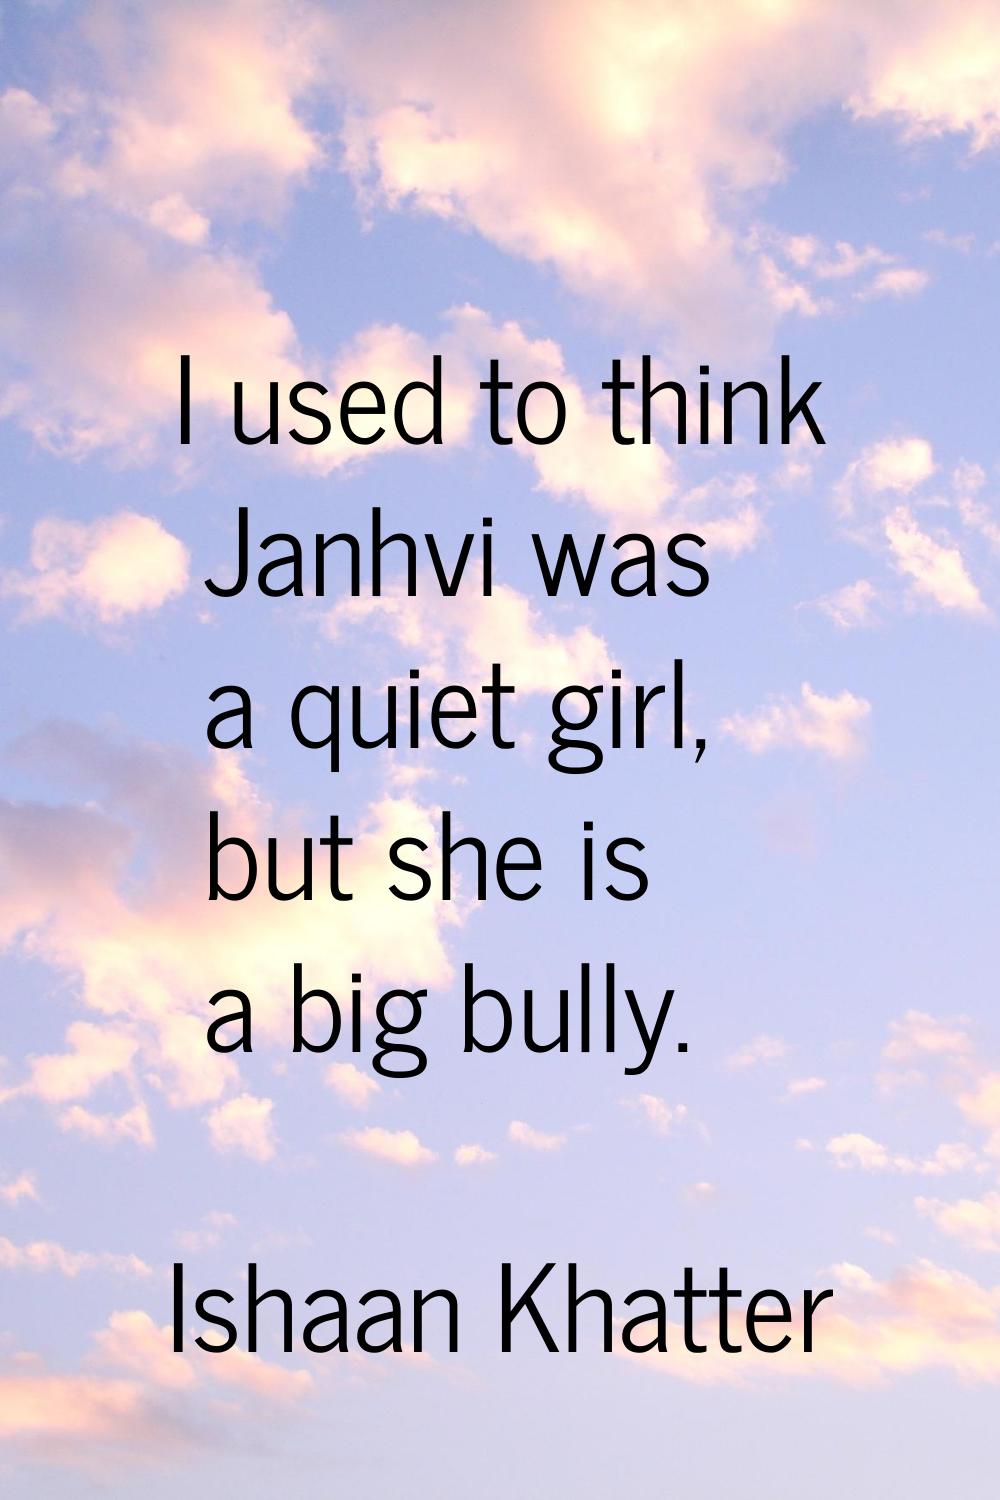 I used to think Janhvi was a quiet girl, but she is a big bully.